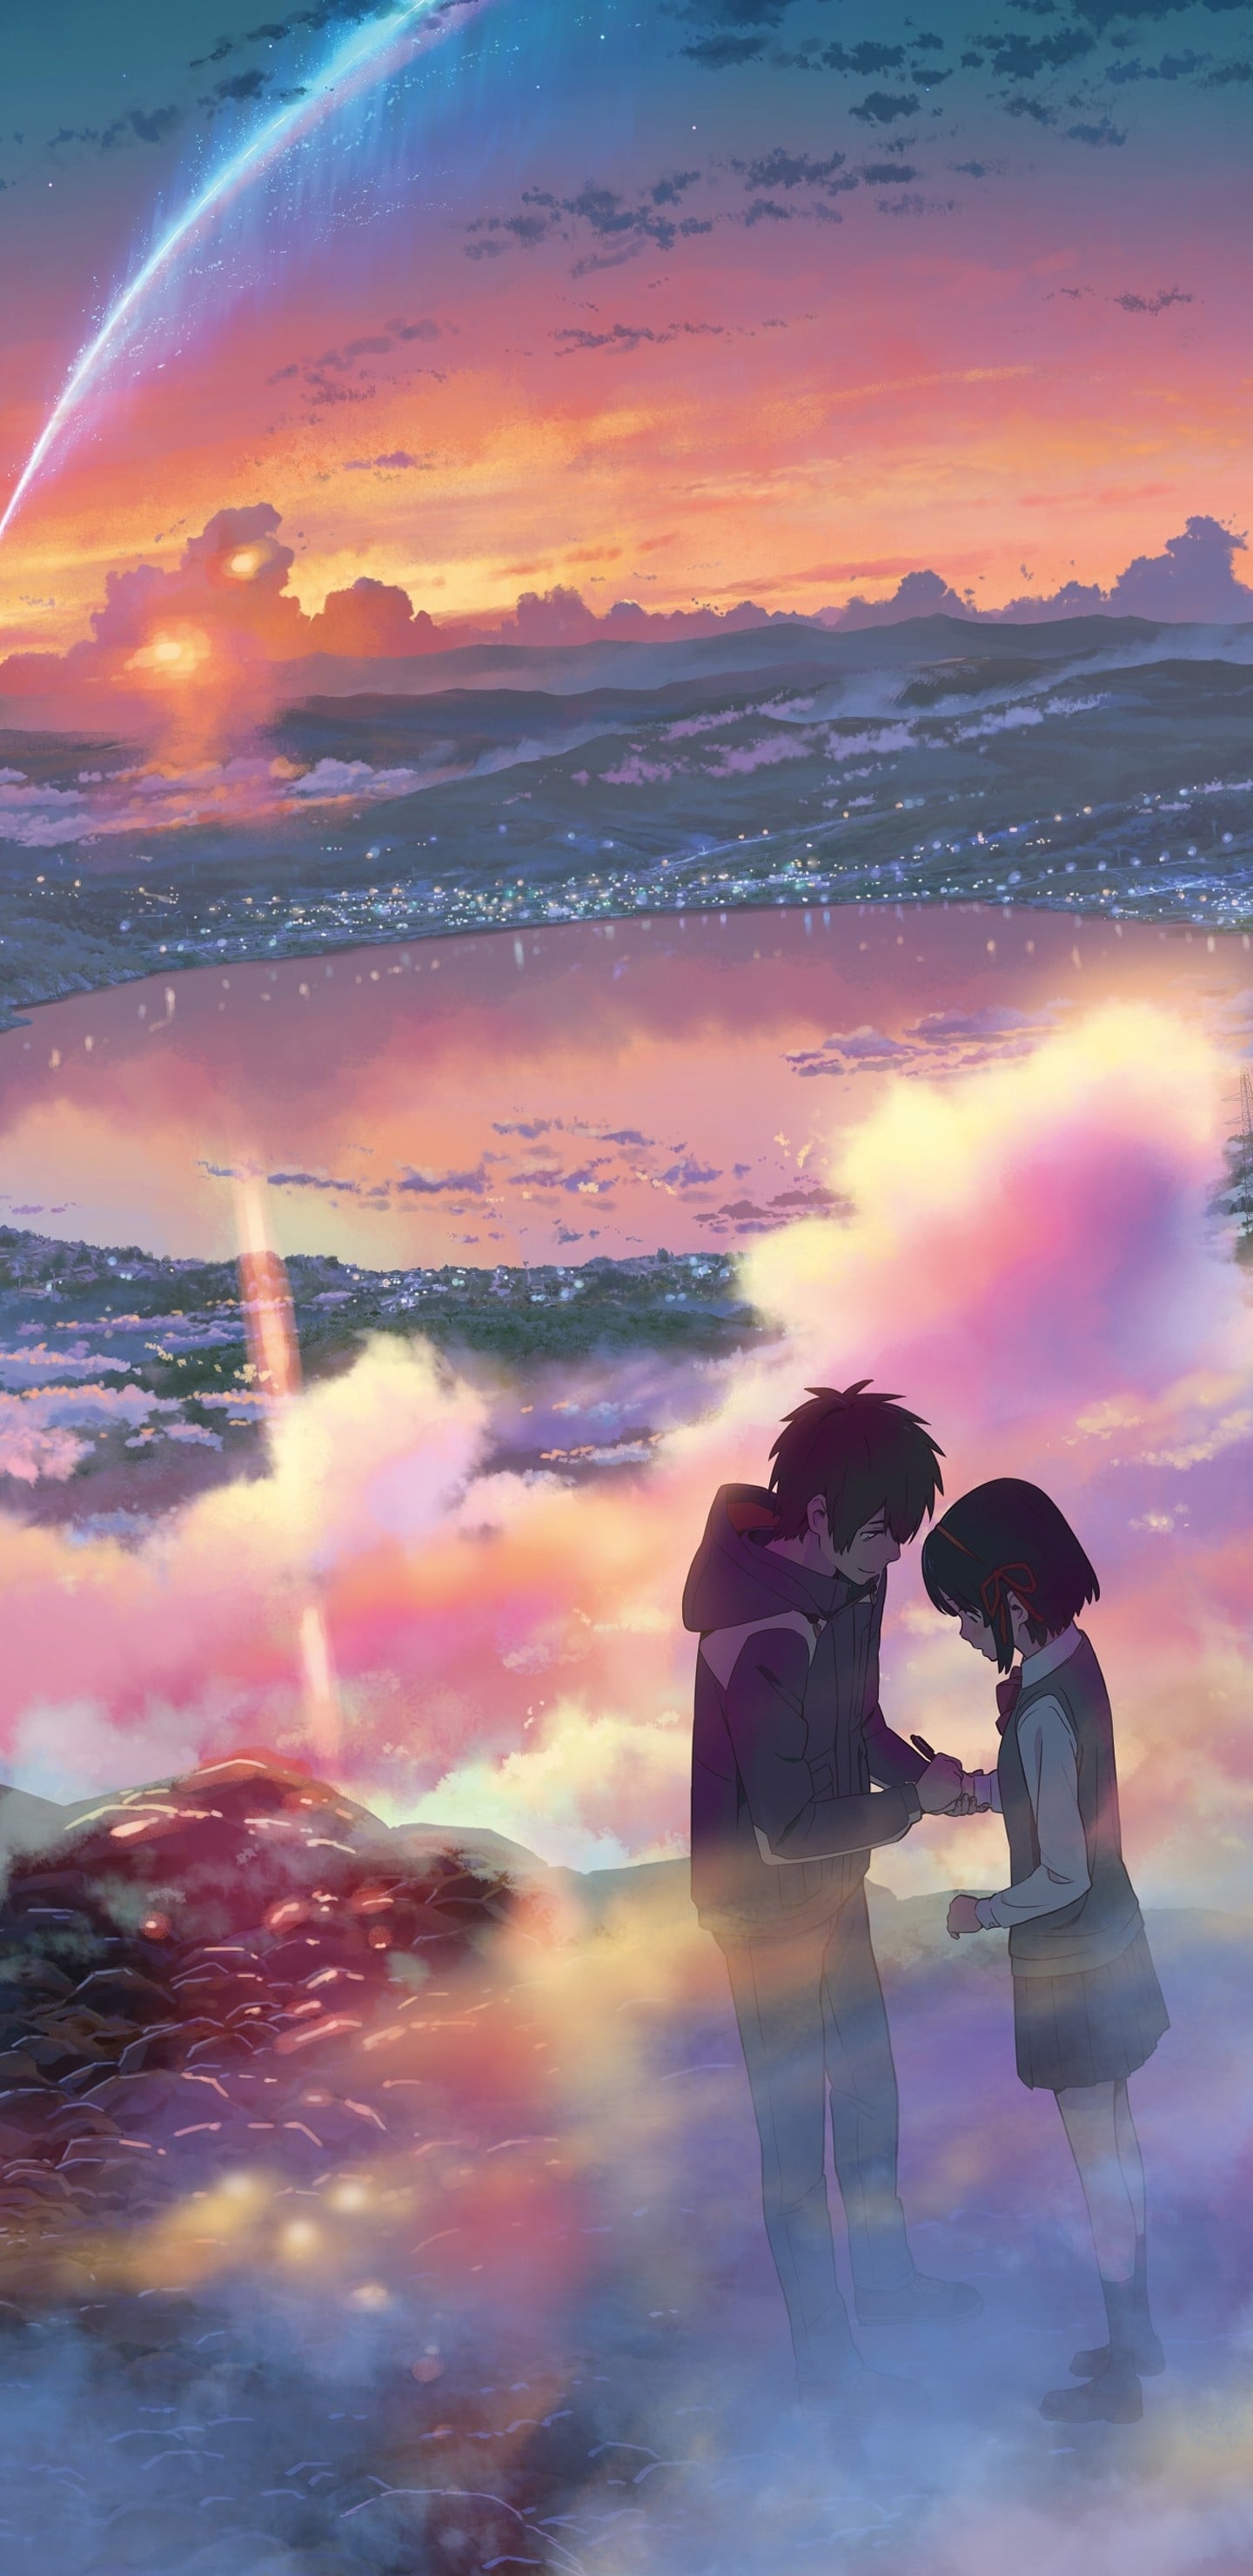 Your Name.